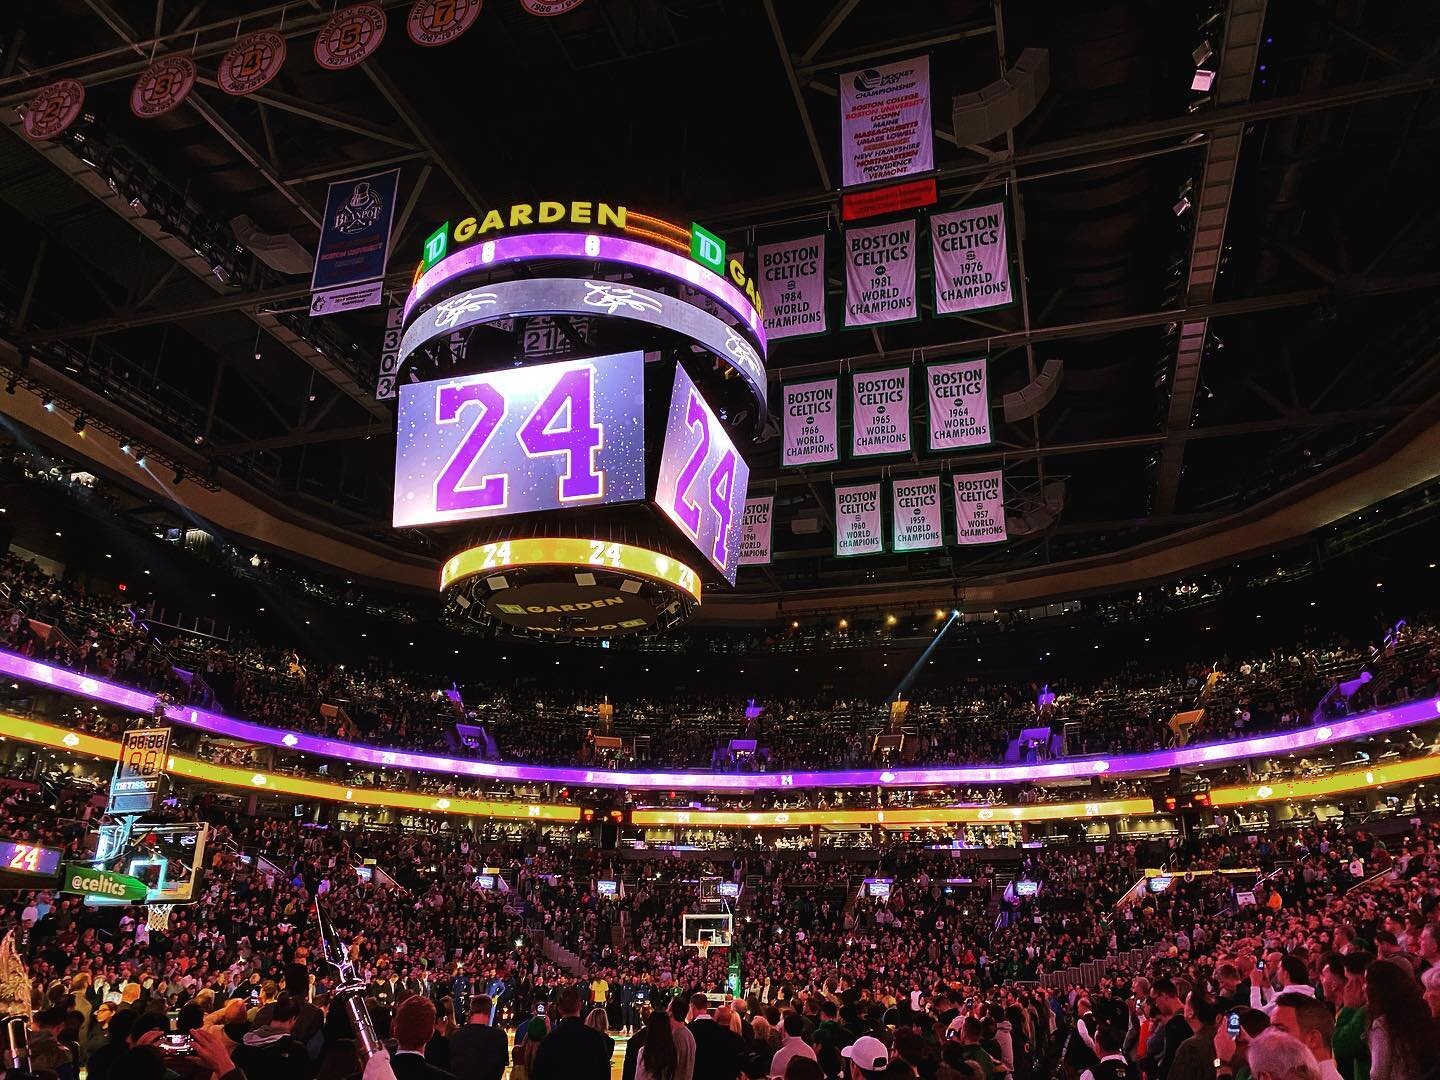 A MOMENT FOR MAMBA &ndash; This season seems like yesterday but also so long ago. Here&rsquo;s vibe from @tdgarden as we honored the life of Kobe Bryant at our first home game after he passed. Crazy to think that the last game I attended prior to bec